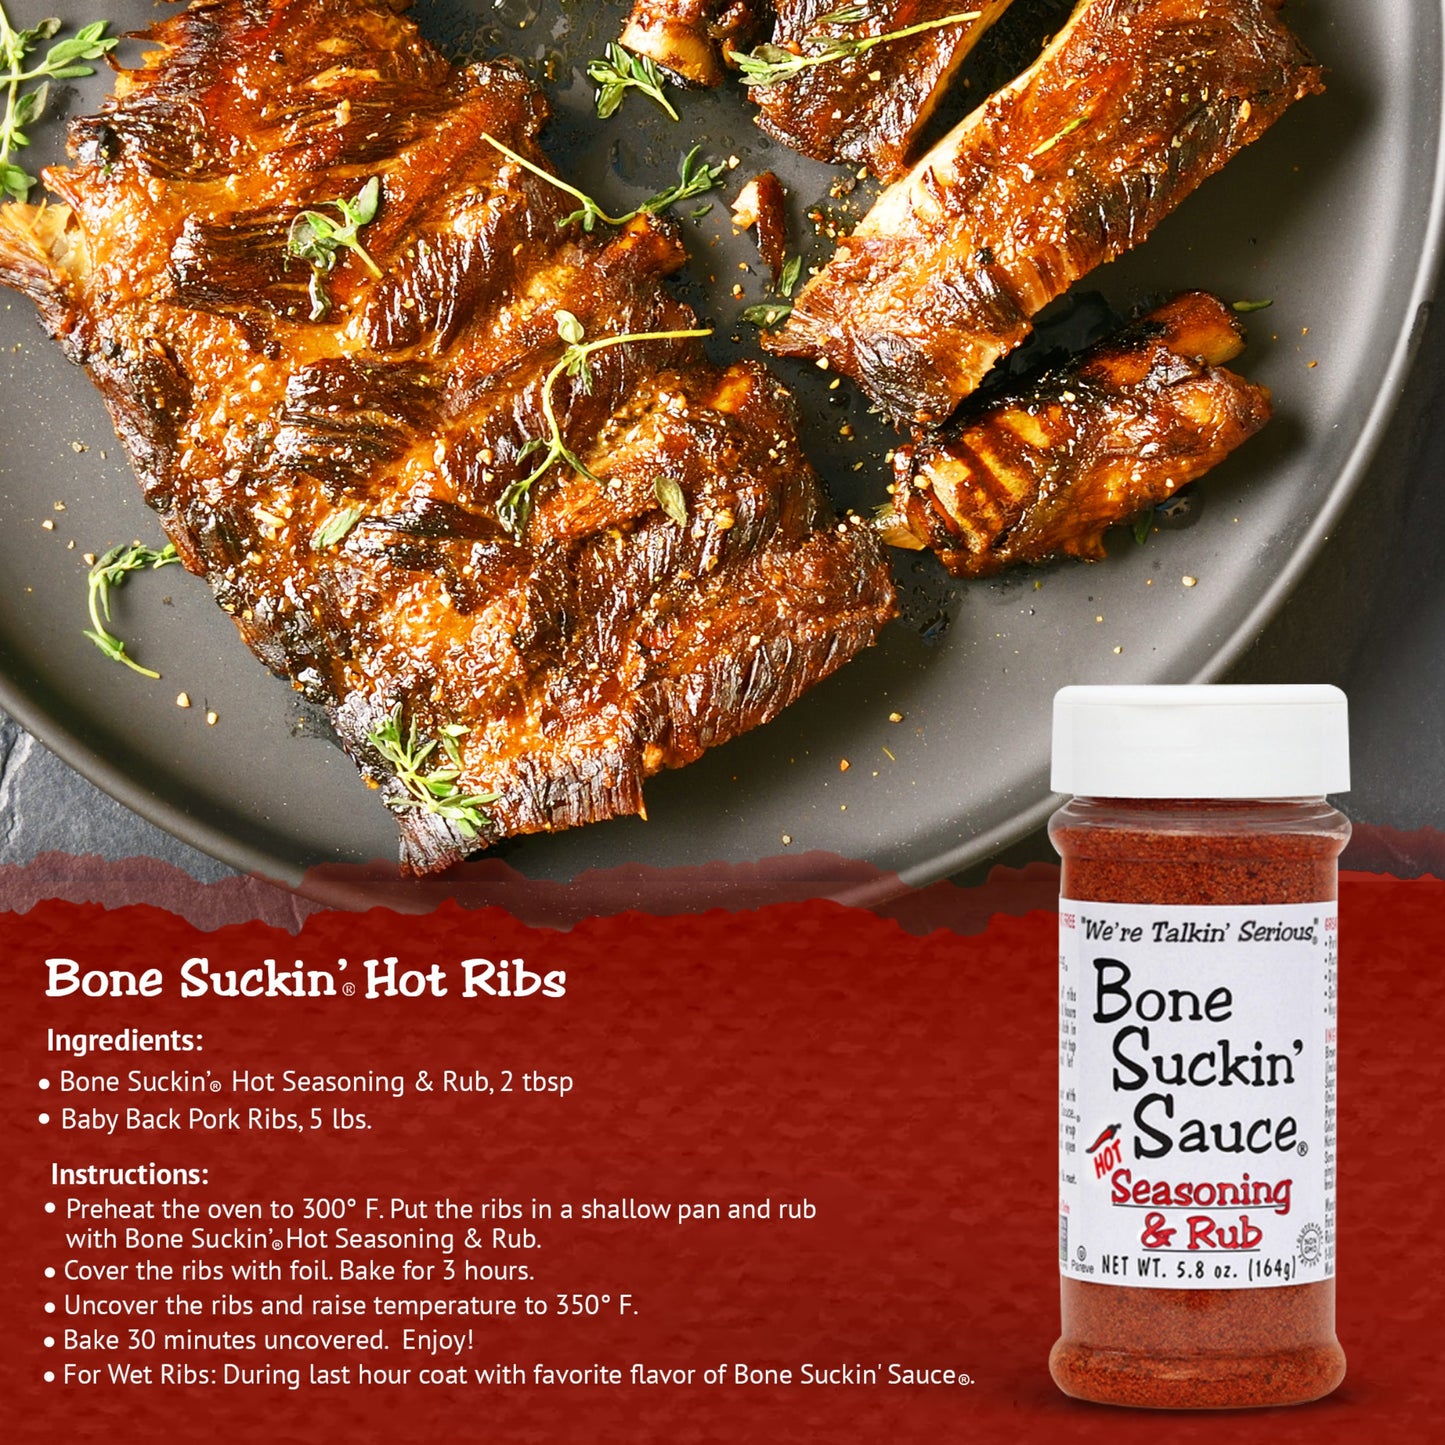 Bone Suckin Hot Ribs Recipe. Ingredients: Bone Suckin' Hot Seasoning & Rub, 2 tbsp, Baby Back Pork Ribs, 5 lbs. Instructions: Preheat oven to 300°F . Put the ribs in a shallow pan and rub with Bone Suckin Hot Seasoning & Rub. Cover the ribs with foil and bake for 3 hours. Uncover the ribs and raise temperature to 350°F. Bake uncovered for 30 minutes. Enjoy!